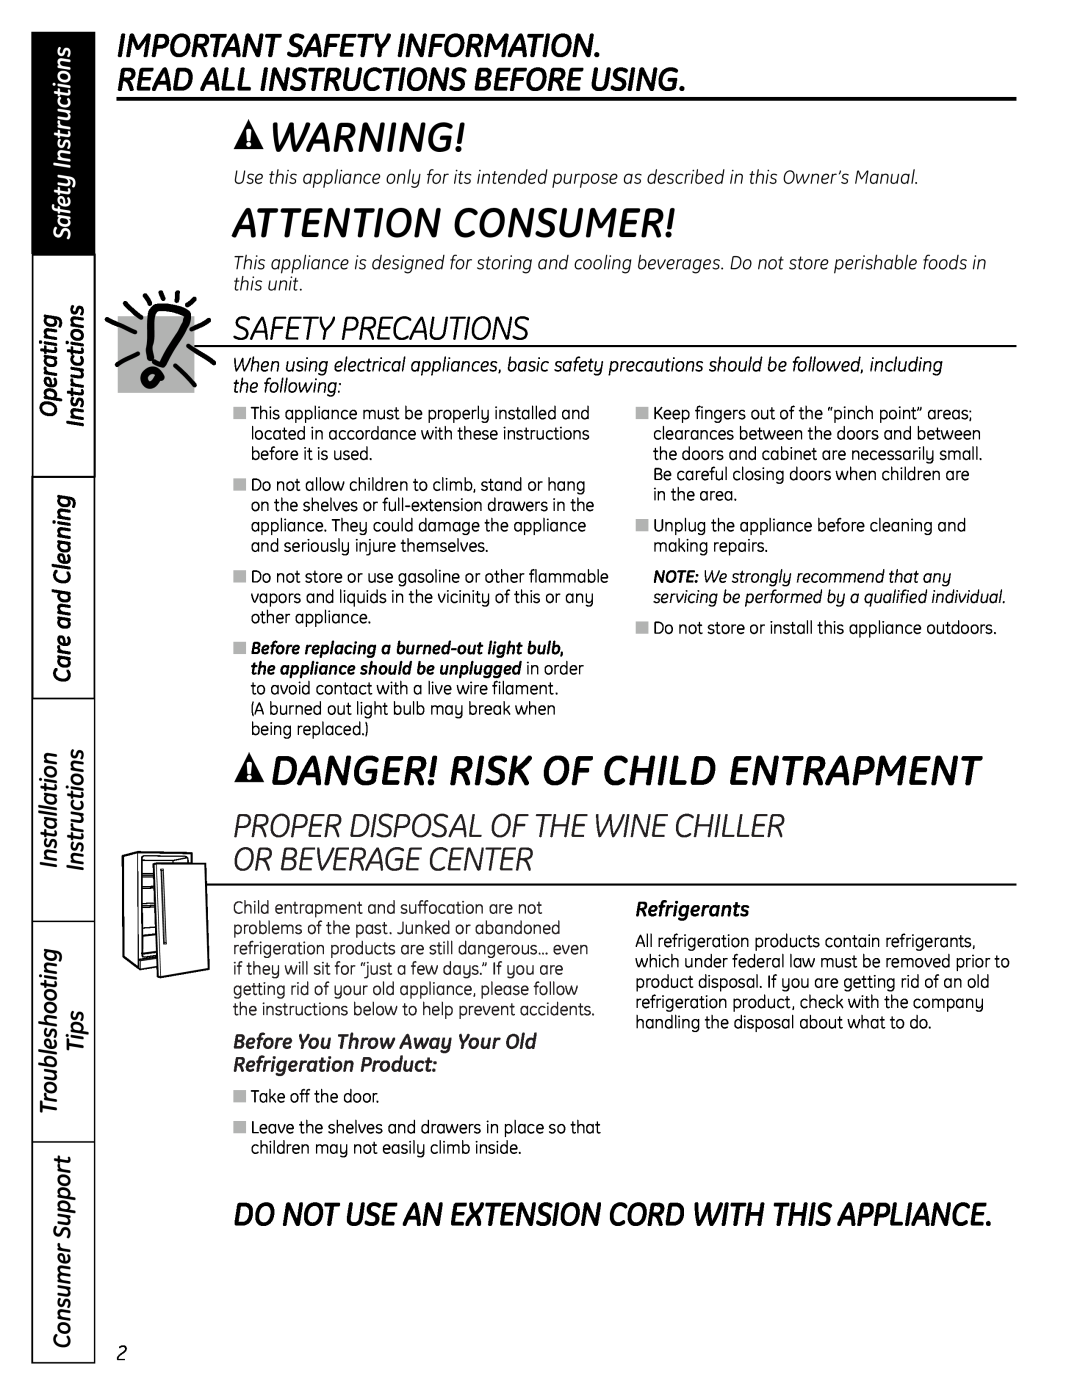 GE 49-60451 Attention Consumer, Danger! Risk Of Child Entrapment, Safety Precautions, Safety Instructions, Operating 